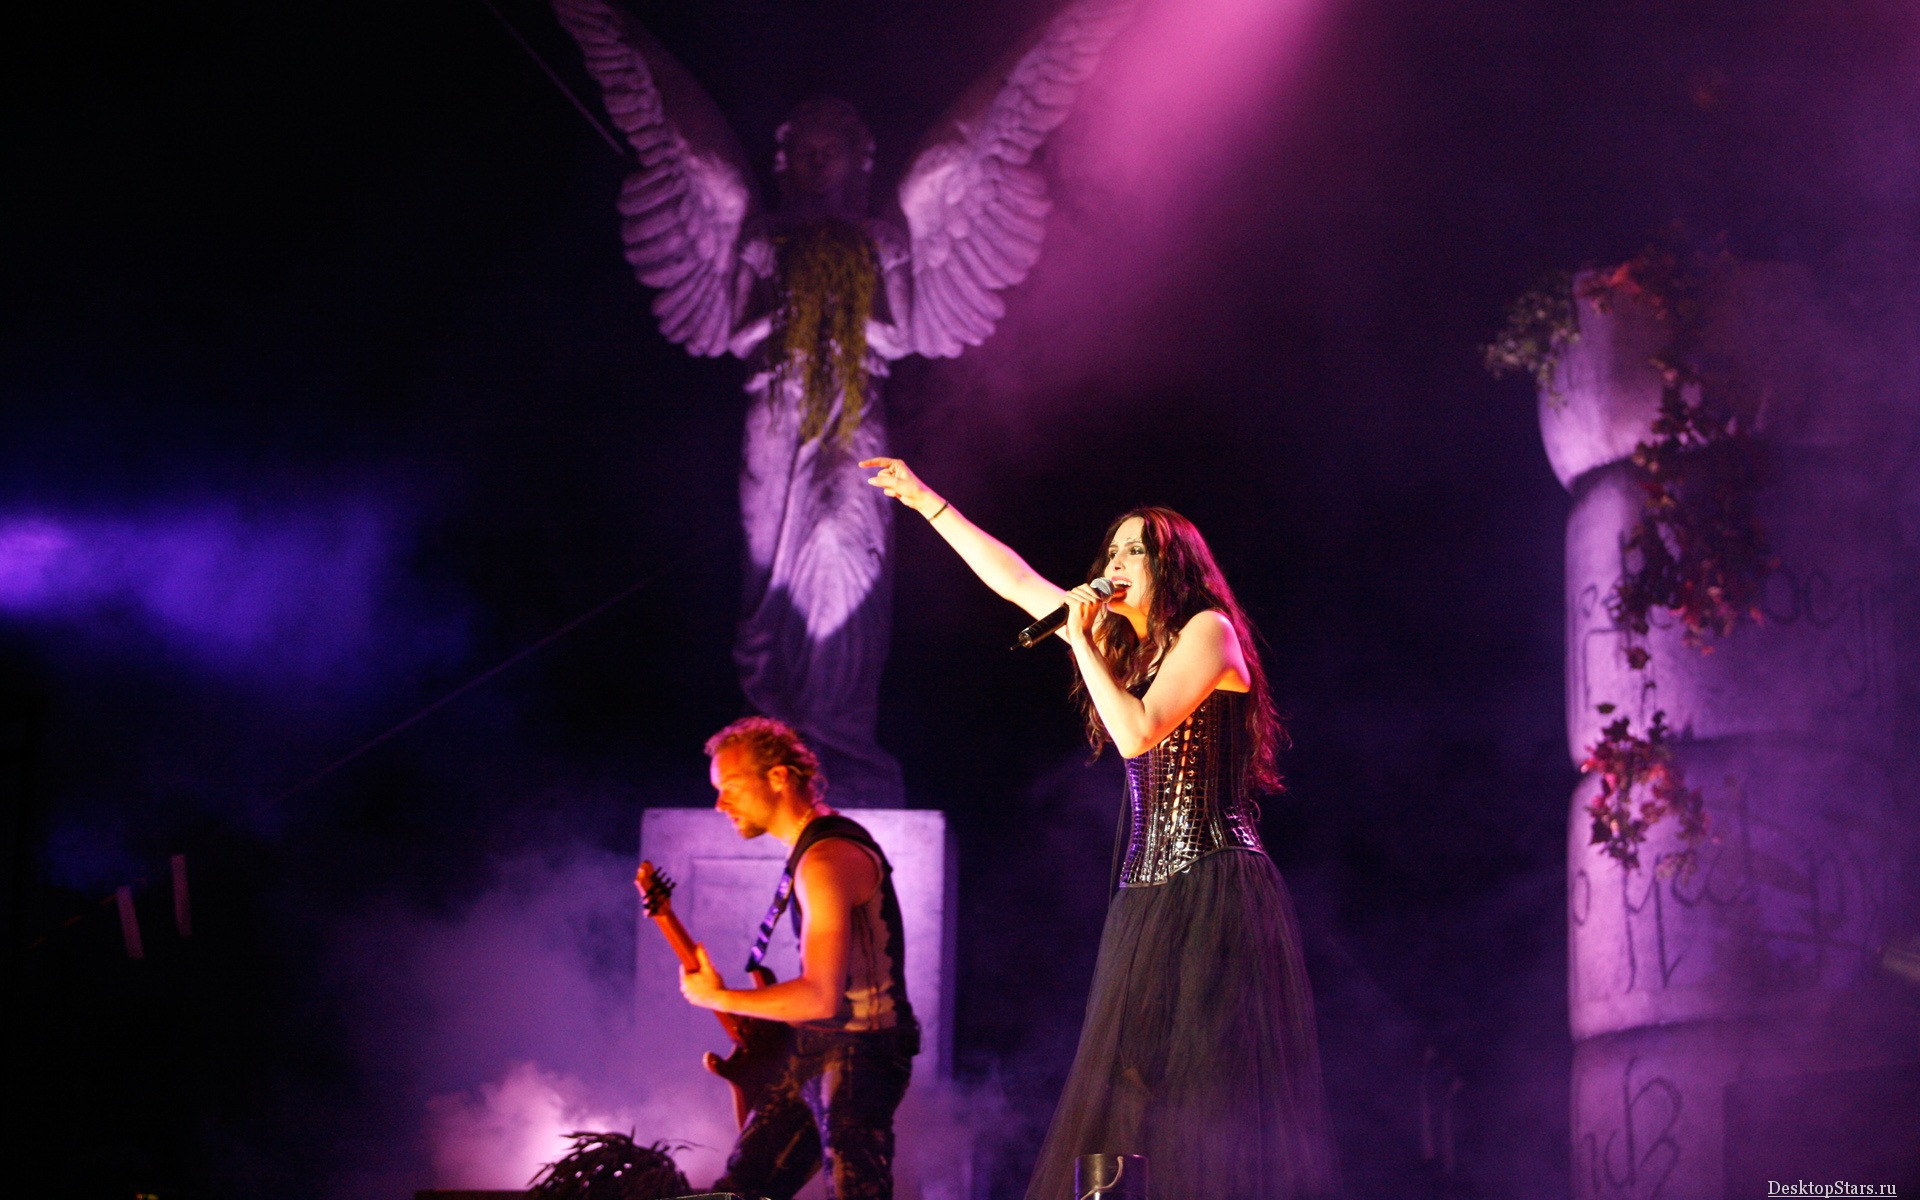 Sharon den Adel #014 - 1920x1200 Wallpapers Pictures Photos Images